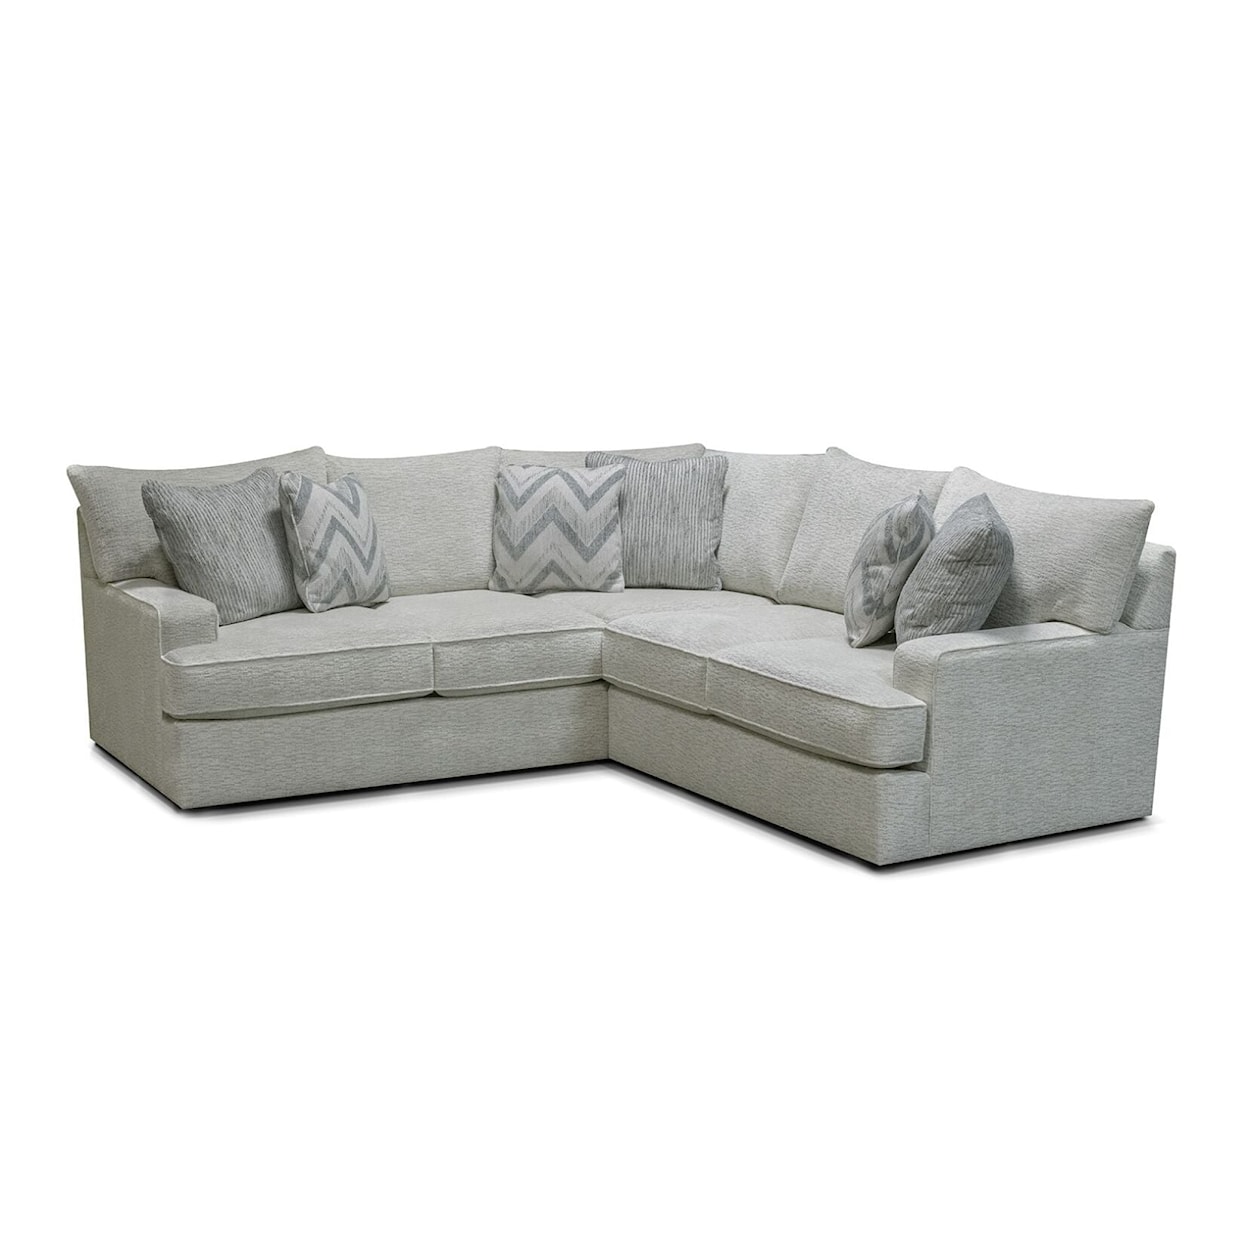 England Anderson 2-Piece Sectional Sofa